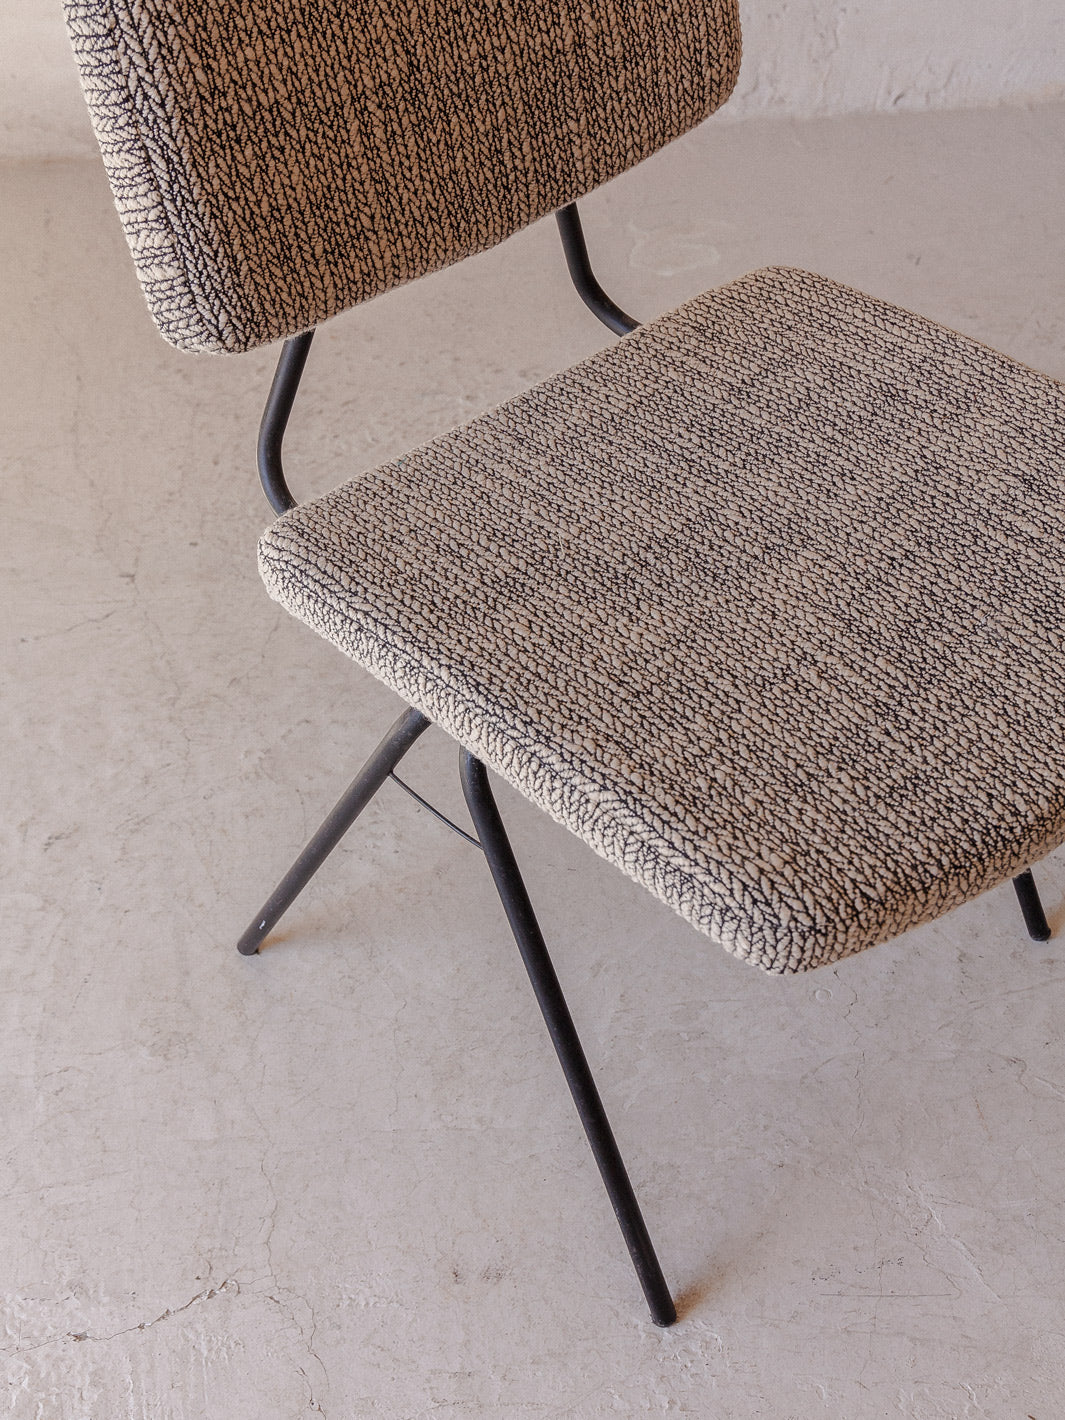 Pierre Guariche armchair chair from the 60s